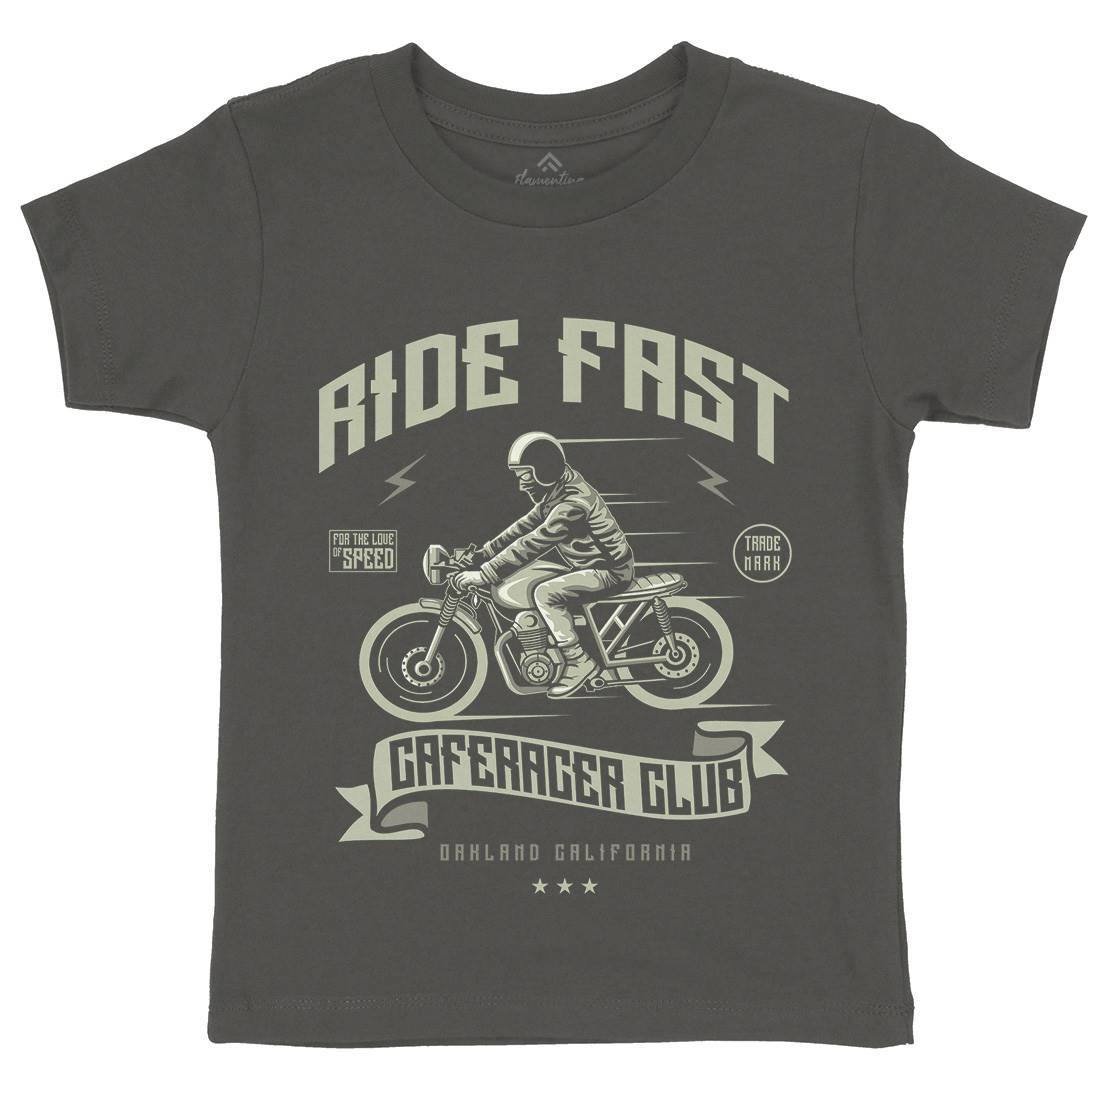 Ride Fast Kids Organic Crew Neck T-Shirt Motorcycles A117